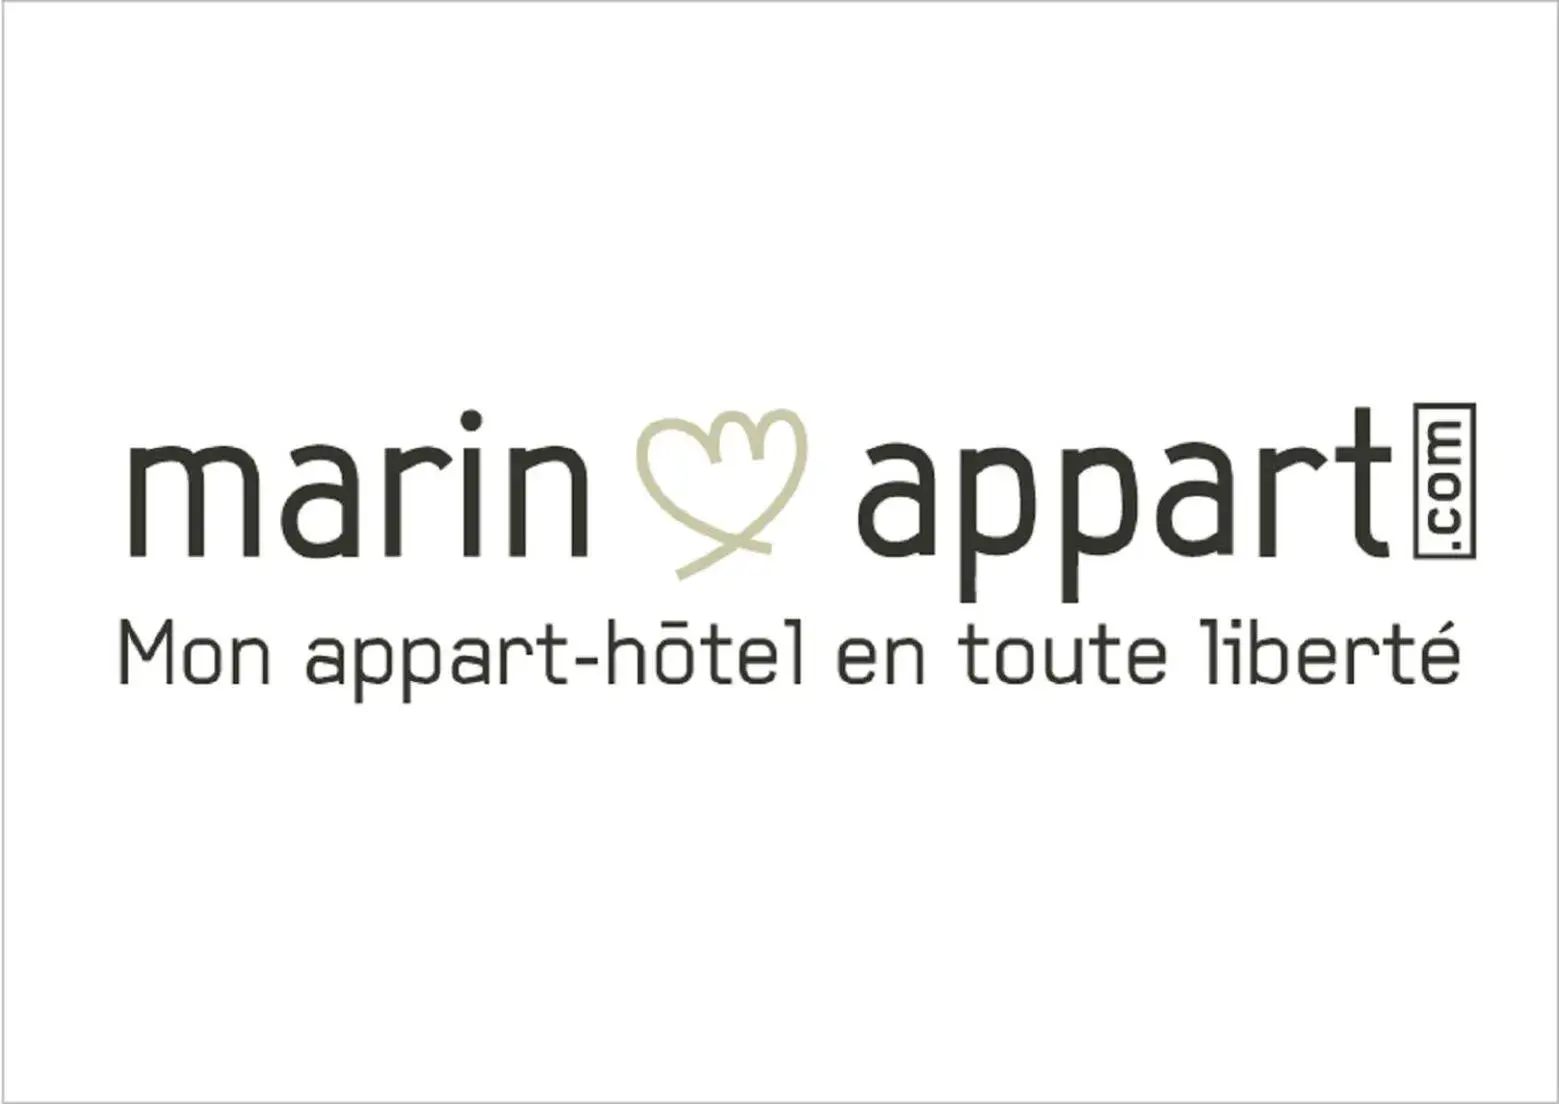 Property logo or sign, Property Logo/Sign in Les Apparts de Marin